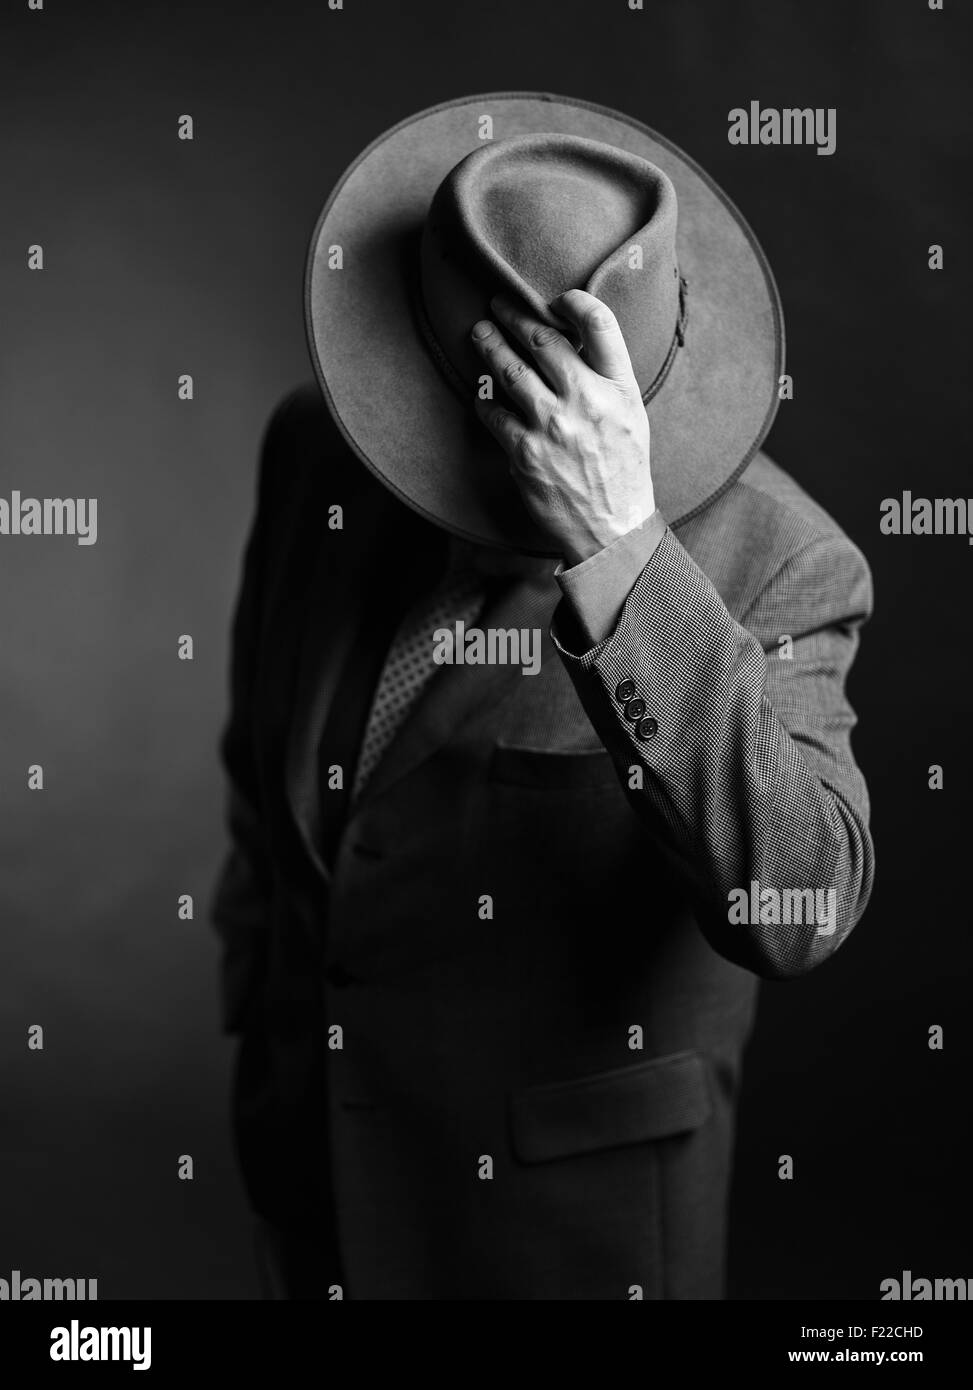 Male wearing dark suit and he covering face with a hat, black and white image Stock Photo